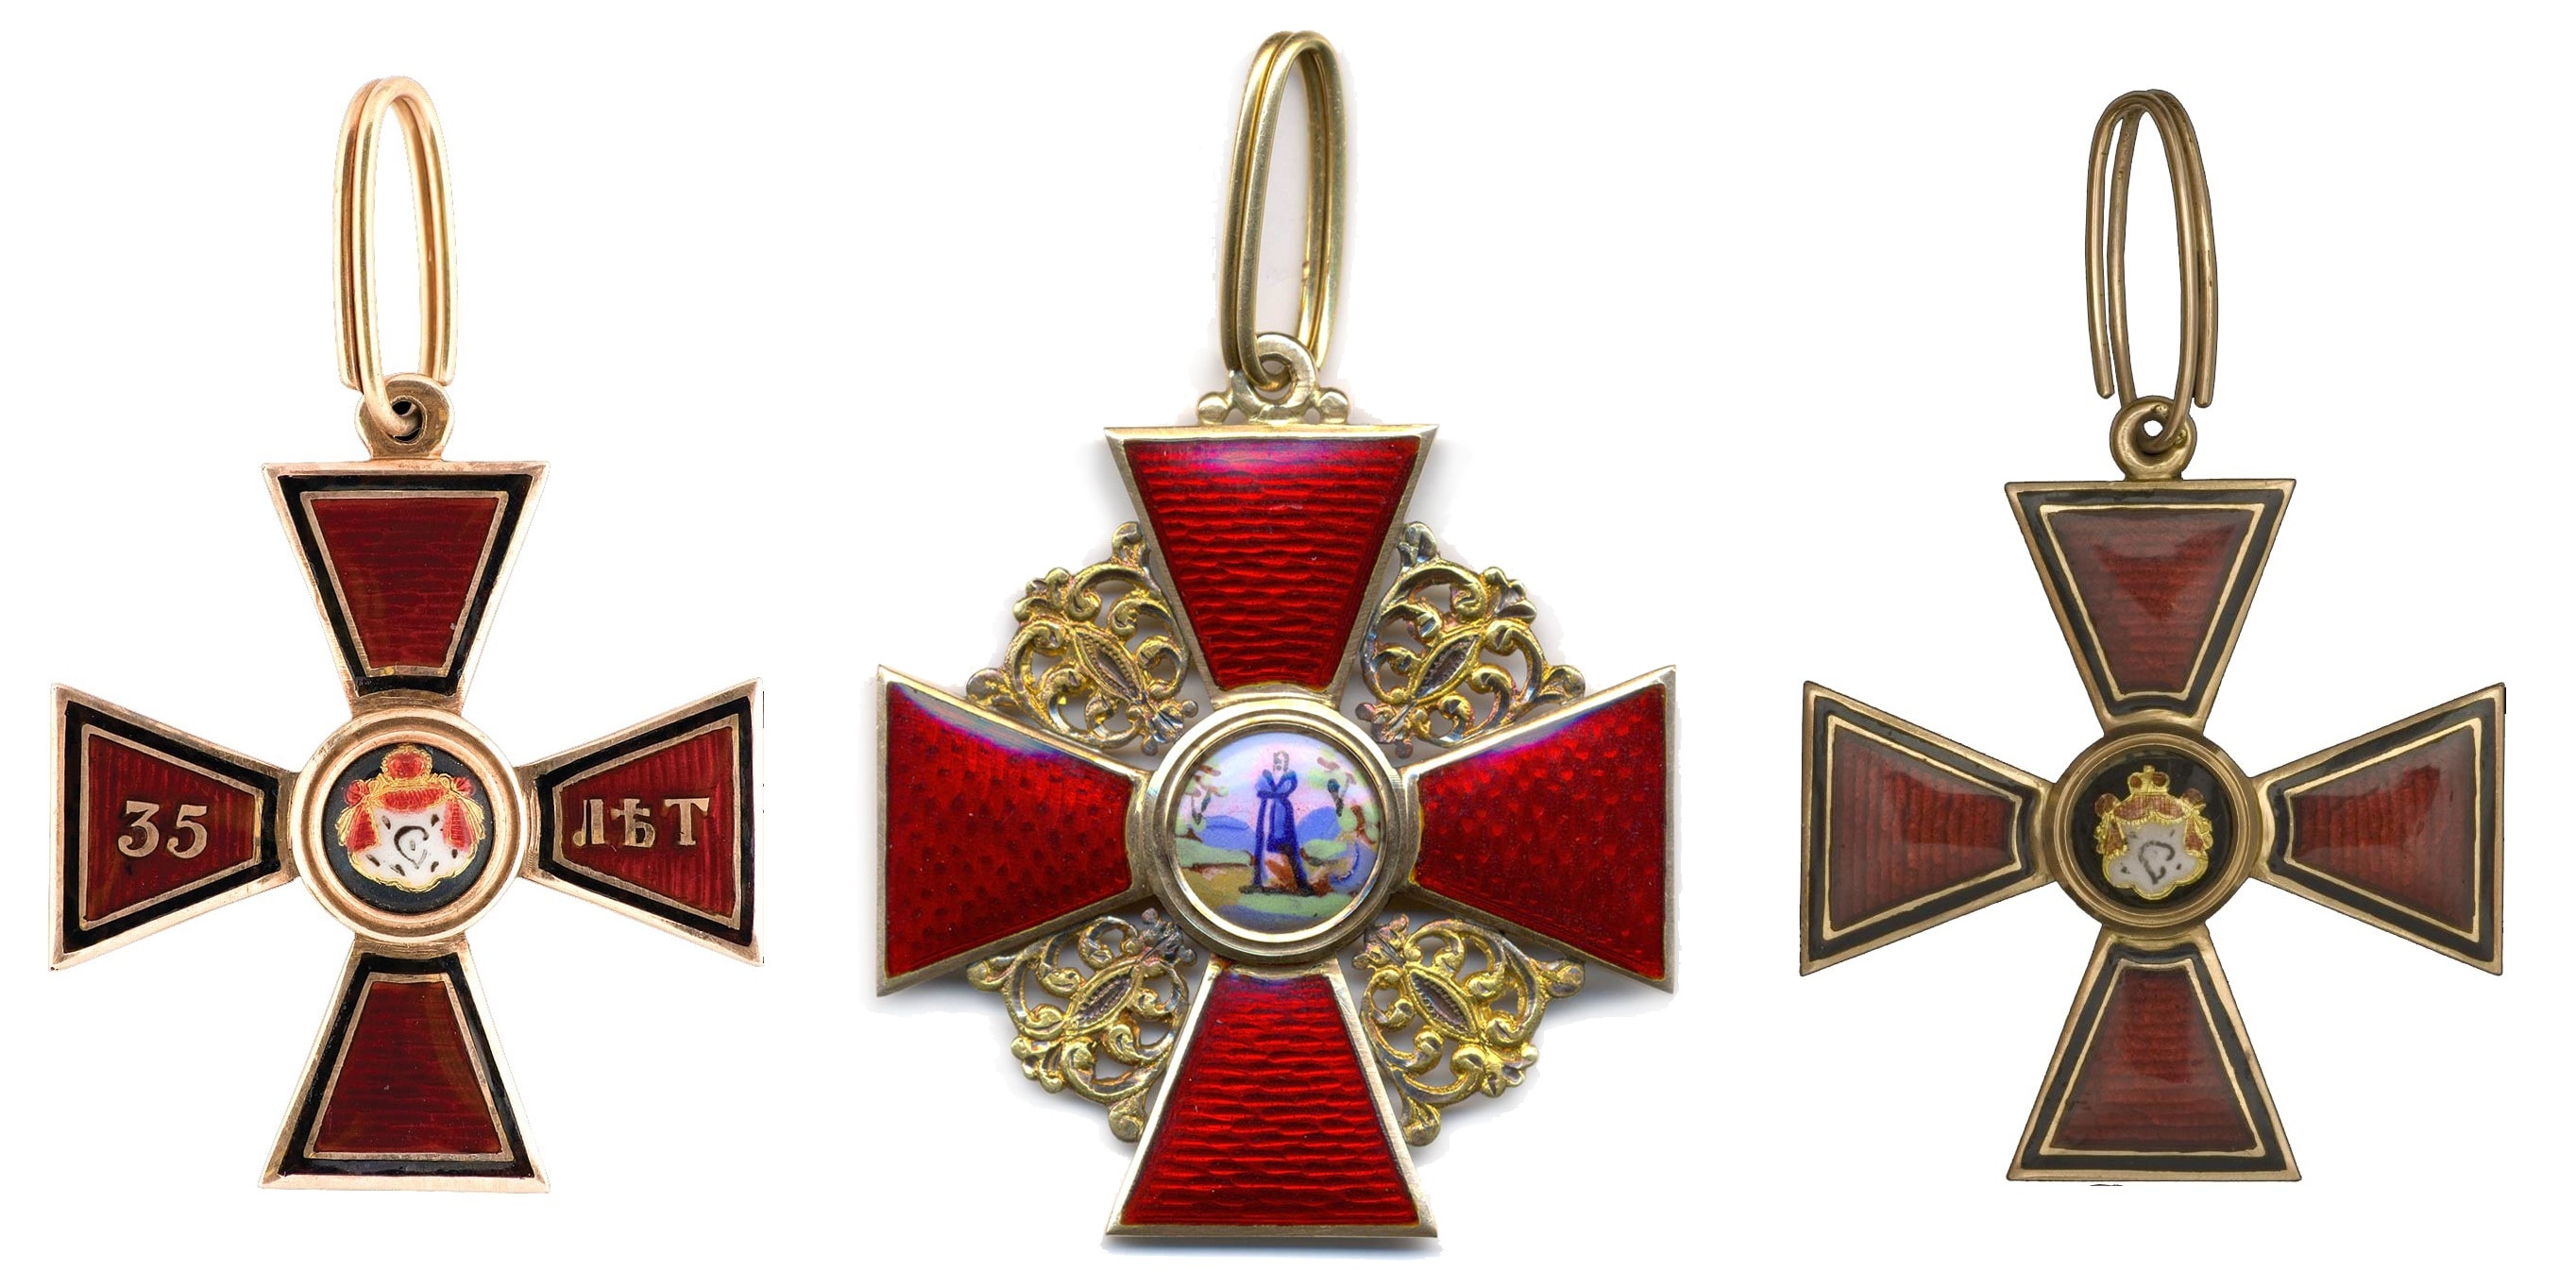 Red Cross With Gold Jewelry - Russian Empire Cross Medal , HD Wallpaper & Backgrounds